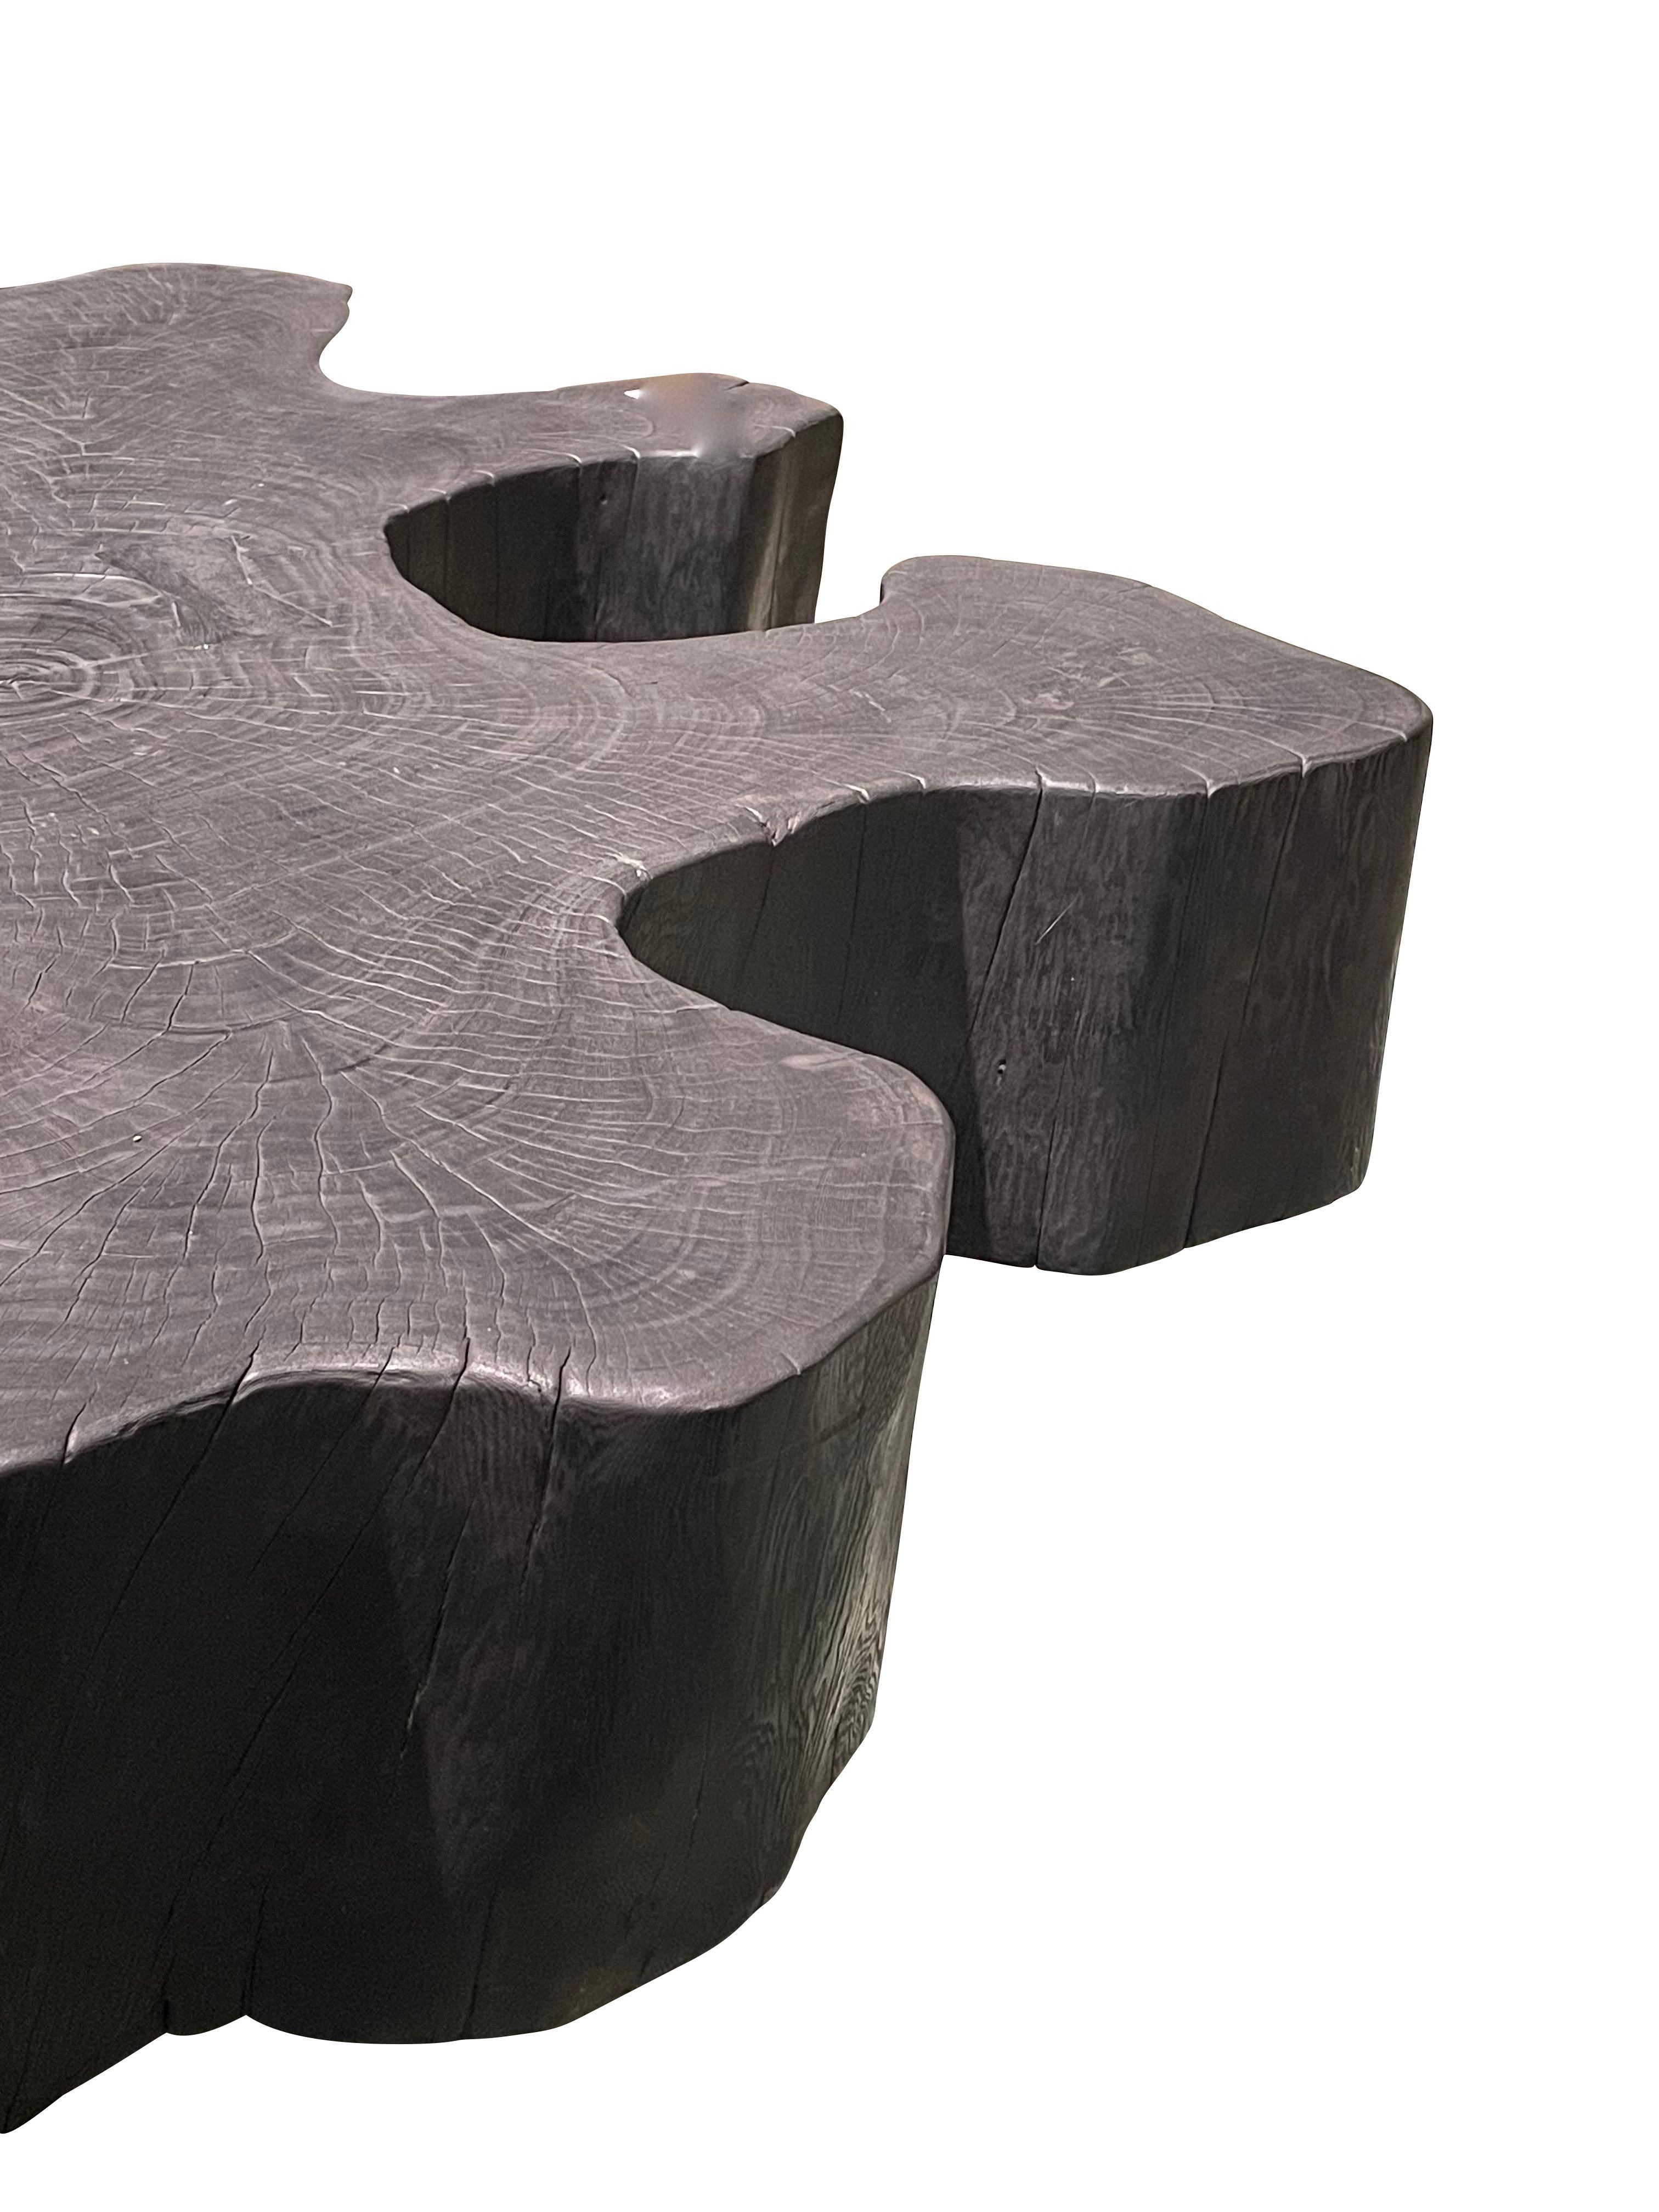 Contemporary Indonesian organic free from shaped coffee table.
Ebonized fruitwood.
